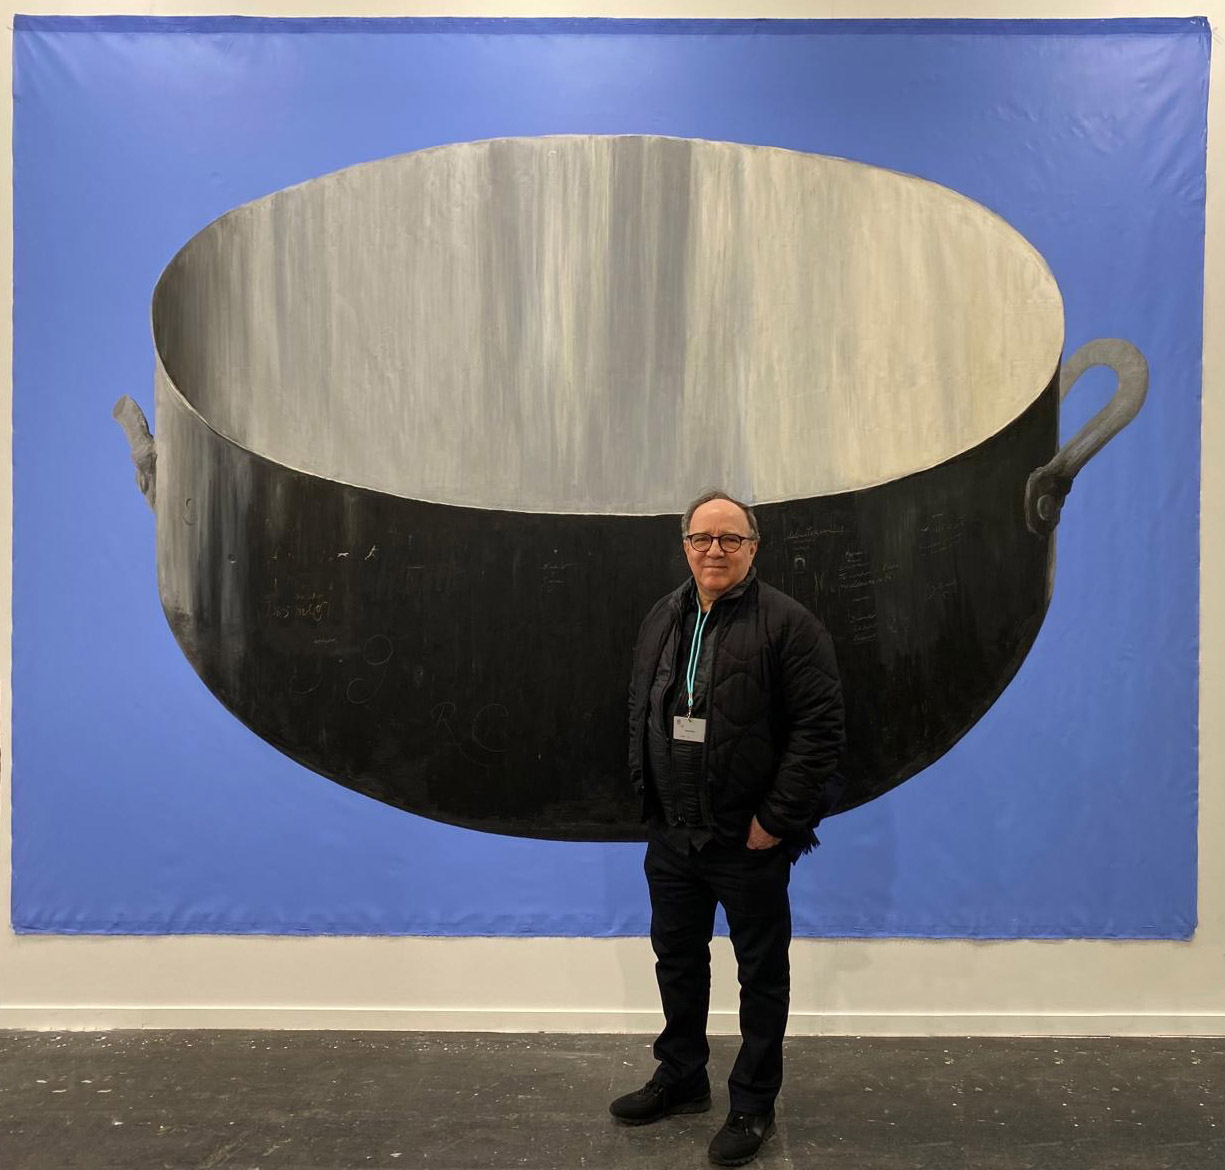 Fabelo in front of his work entitled Dios mío during the Feria de Arco. Madrid 2020.